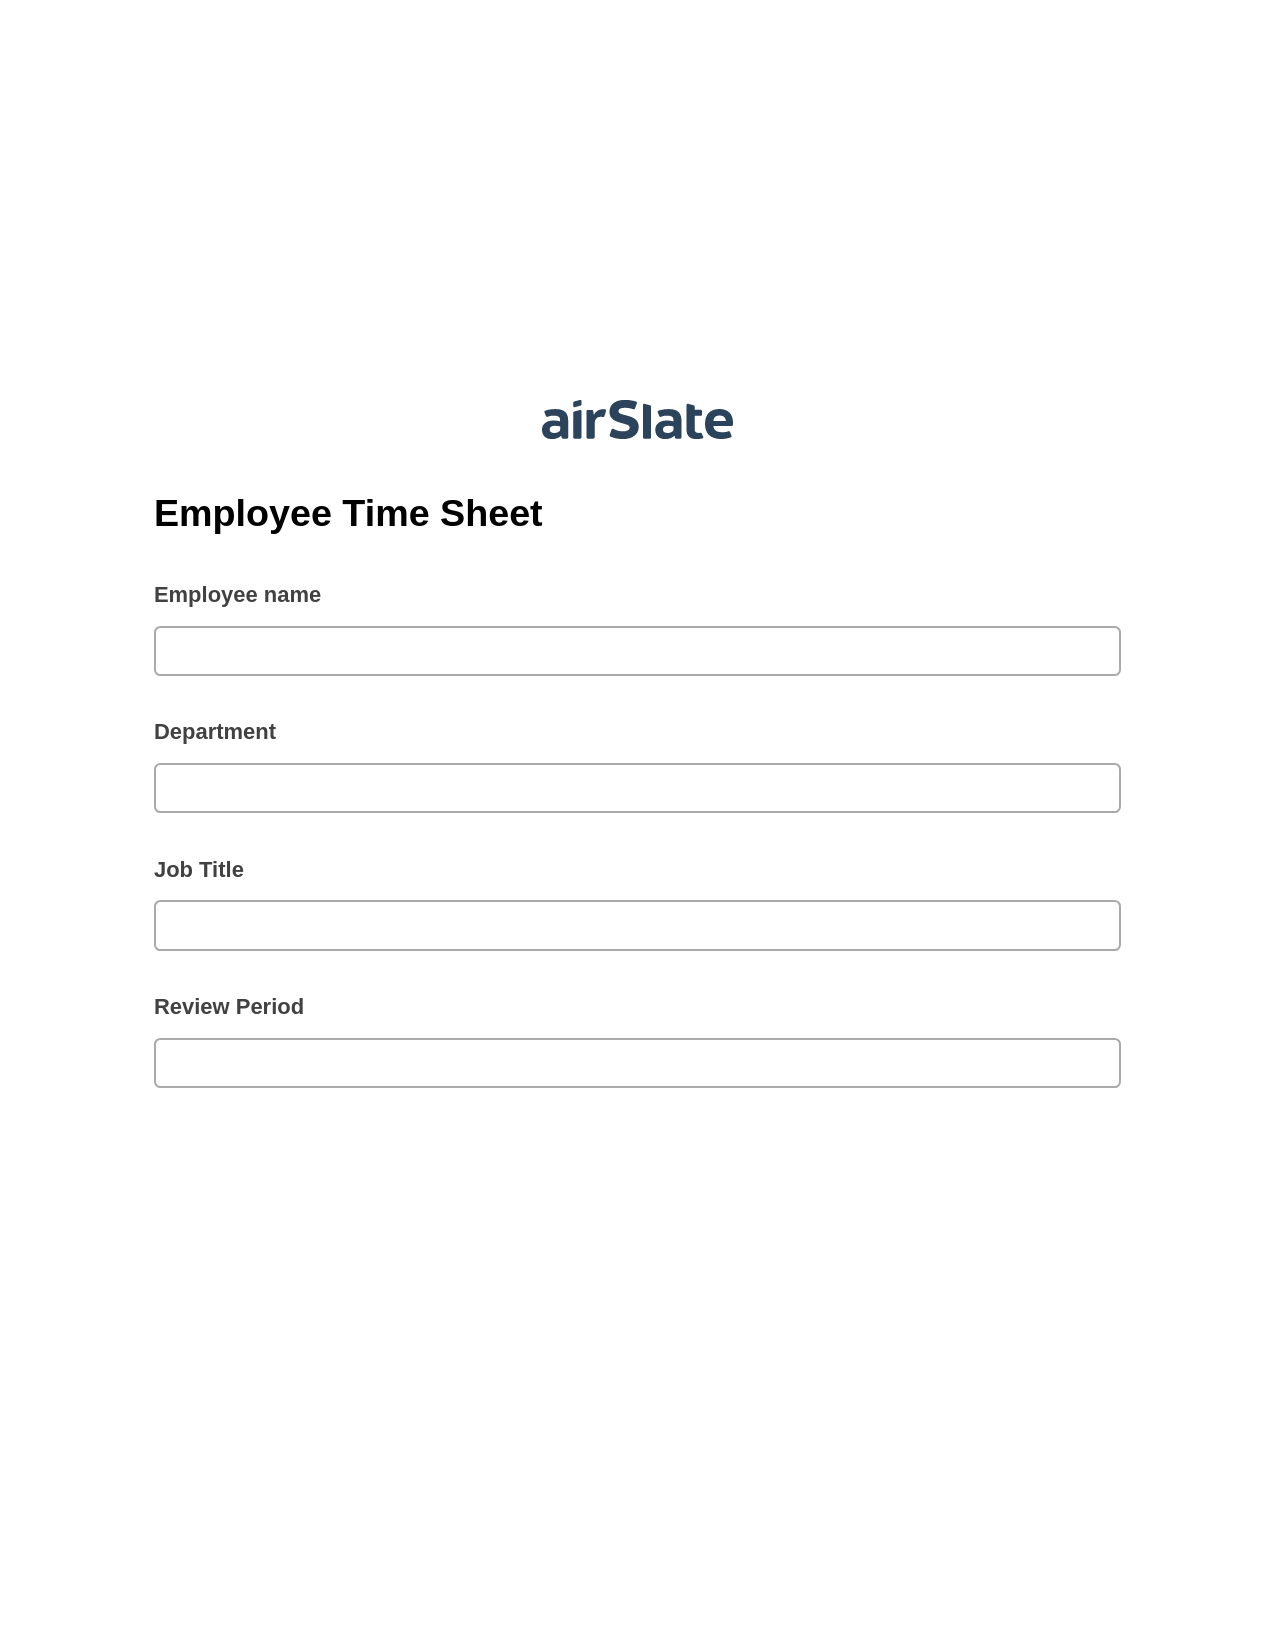 Multirole Employee Time Sheet Pre-fill Dropdowns from Excel Bot, Create slate addon, Export to NetSuite Bot